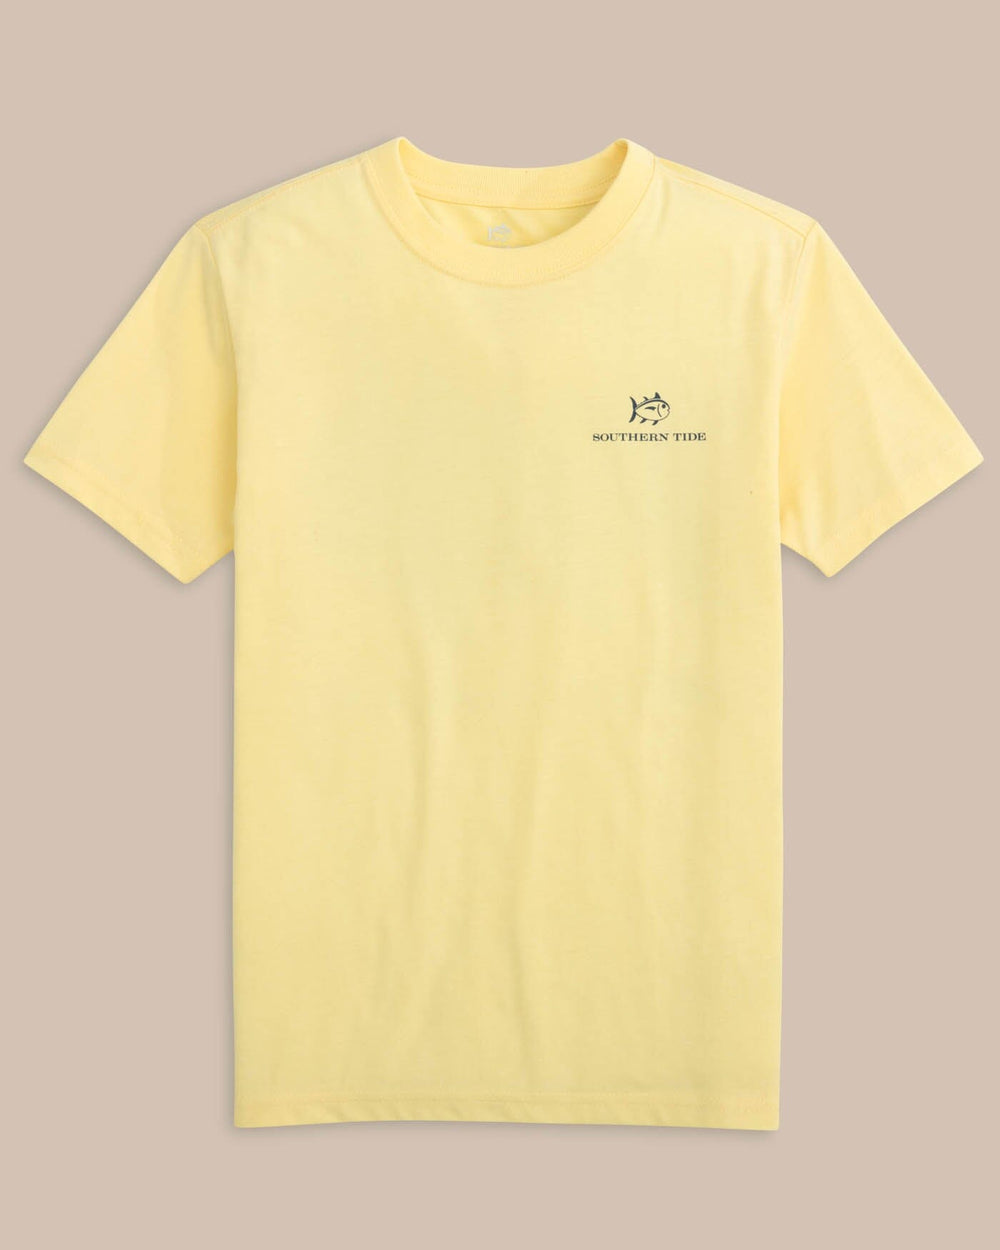 The front view of the Southern Tide Kids Bottoms Up Short Sleeve T-shirt by Southern Tide - Blonde